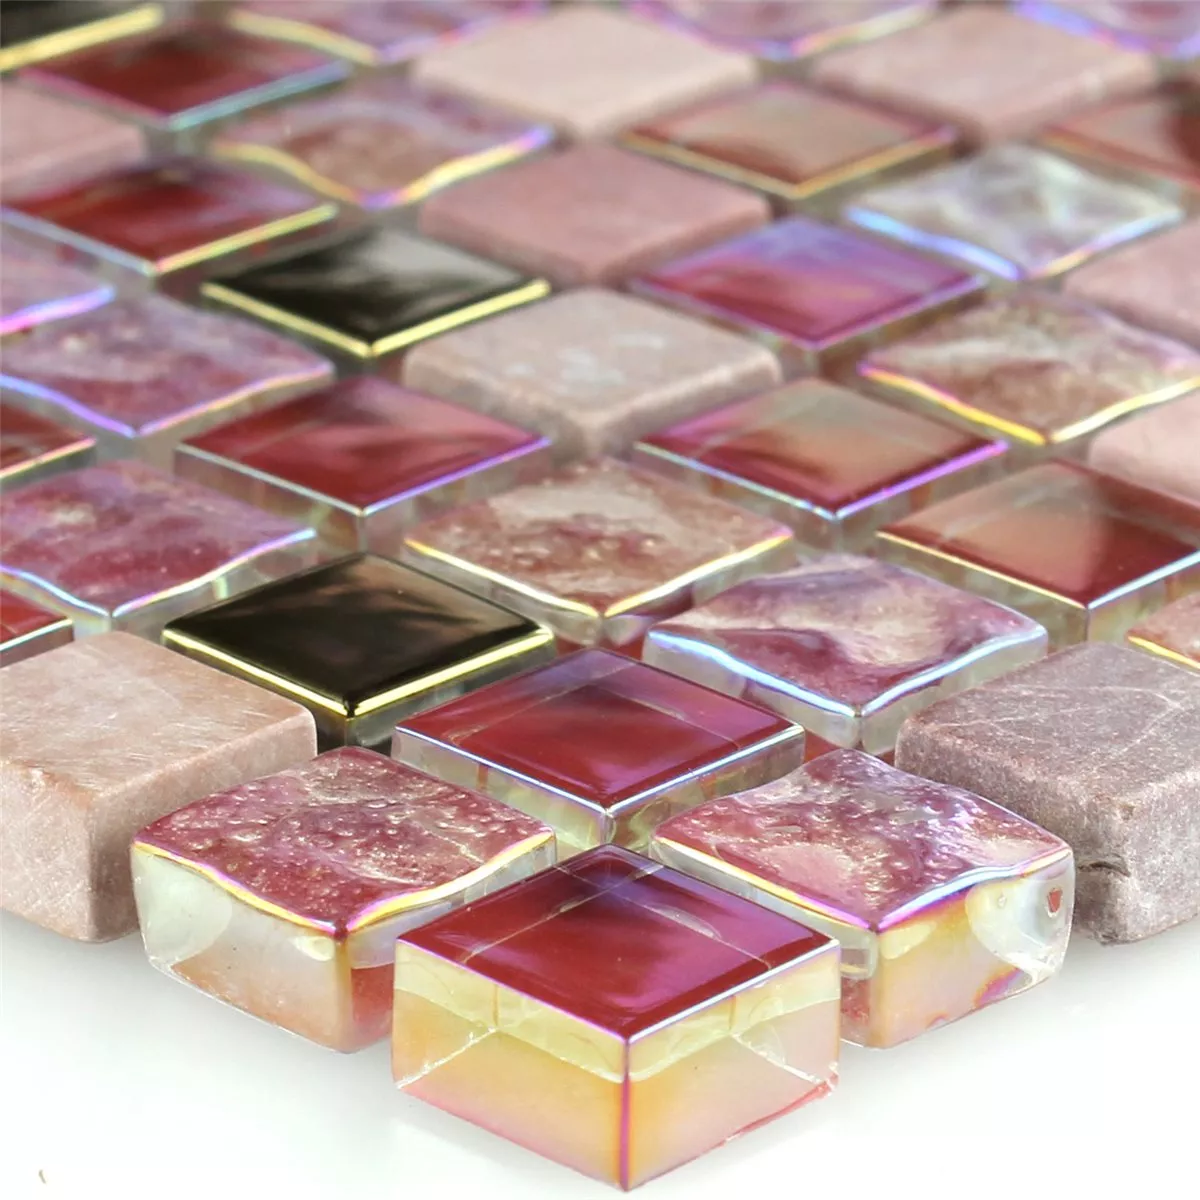 Mosaic Tiles Glass Natural Stone Red Pink Gold